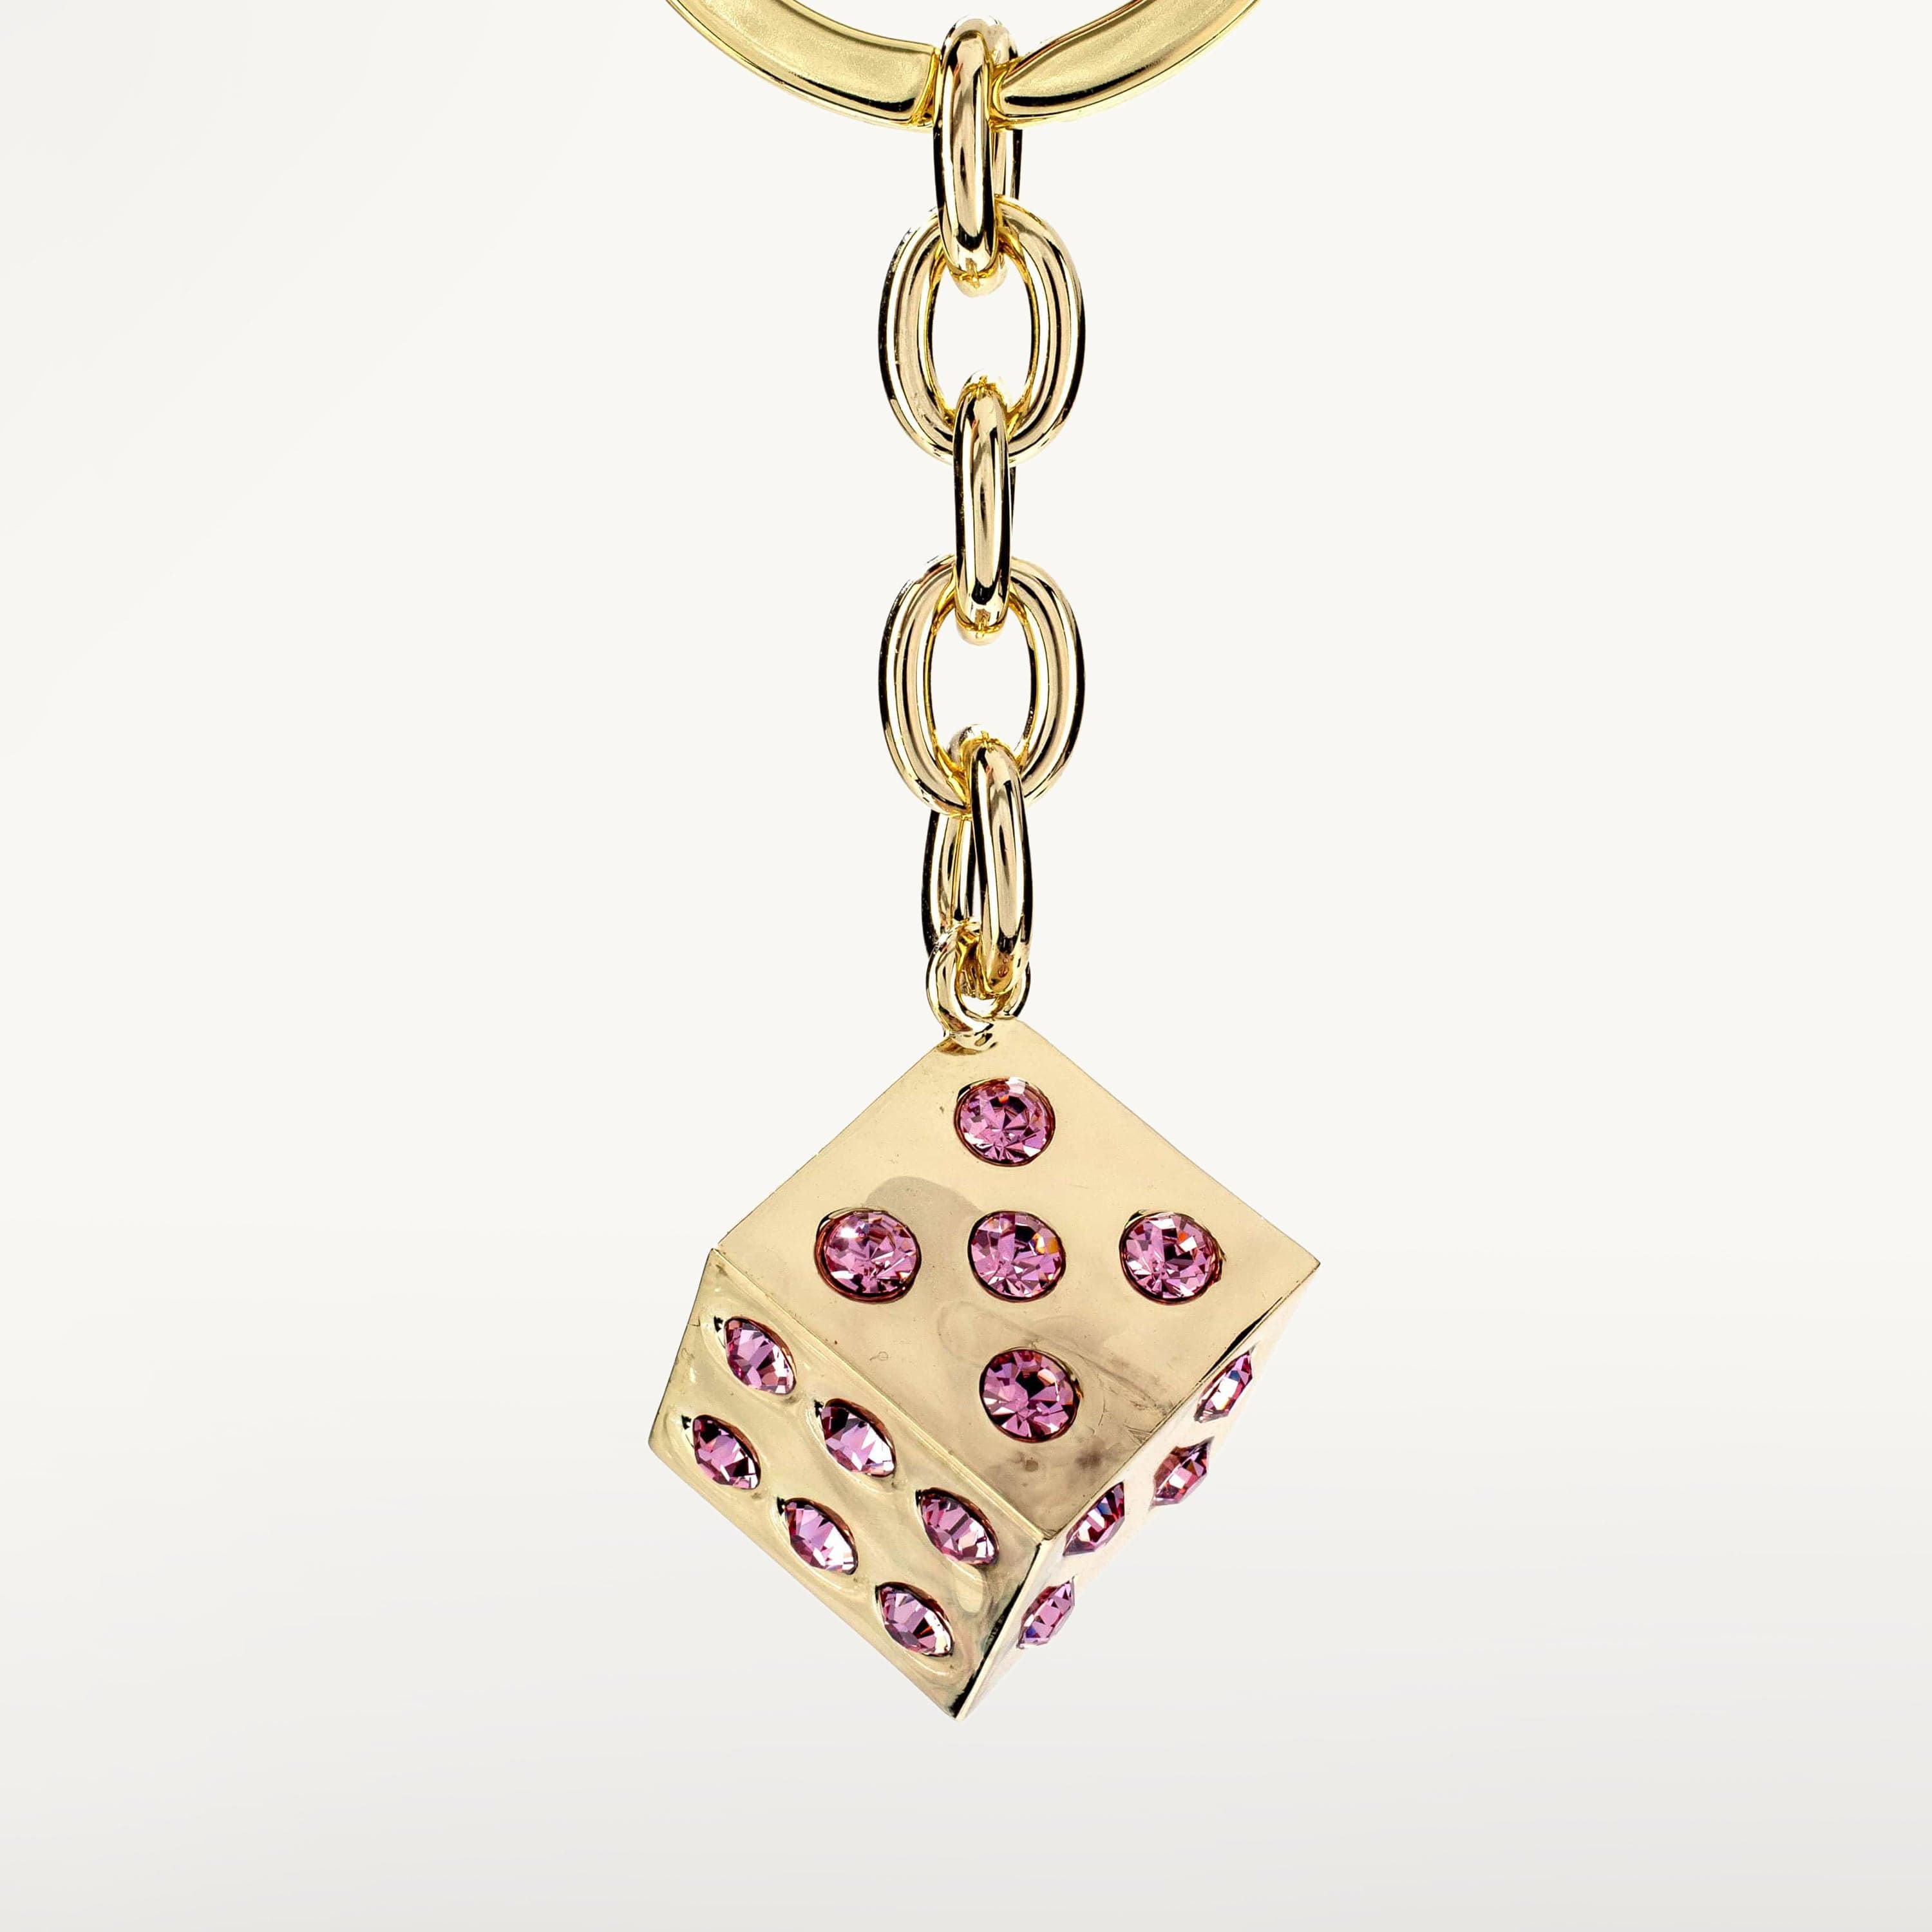 Pink Dice with Gold Keychain made with Swarovski Crystals